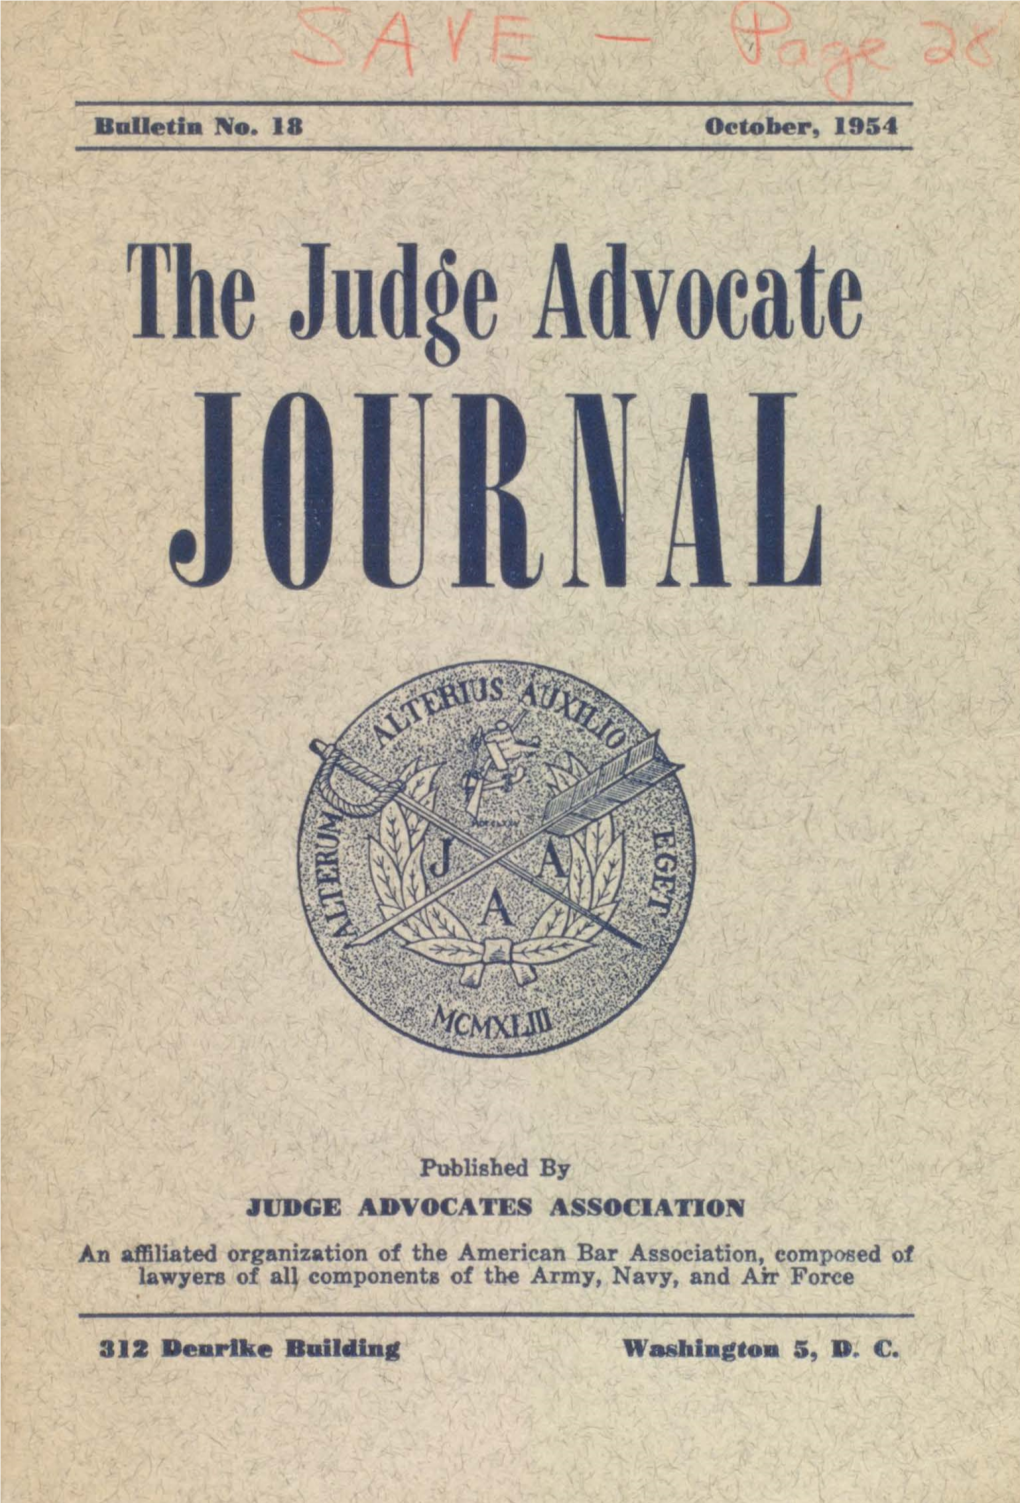 The Judge Advocate Journal, Bulletin No. 18, October, 1954